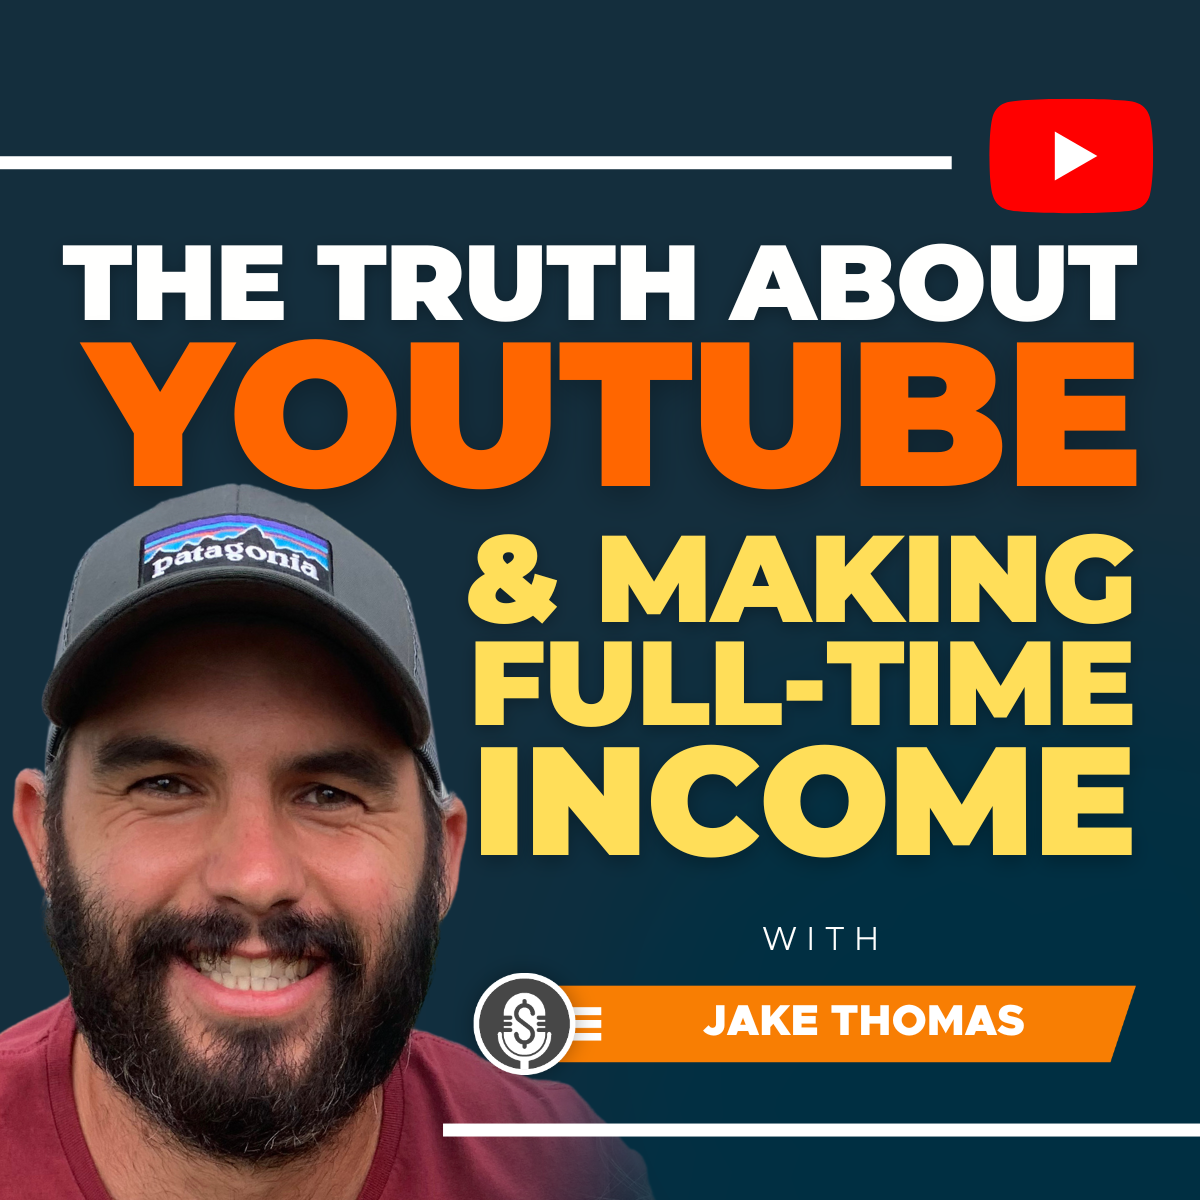 The TRUTH about YouTube & making full-time income with Jake Thomas